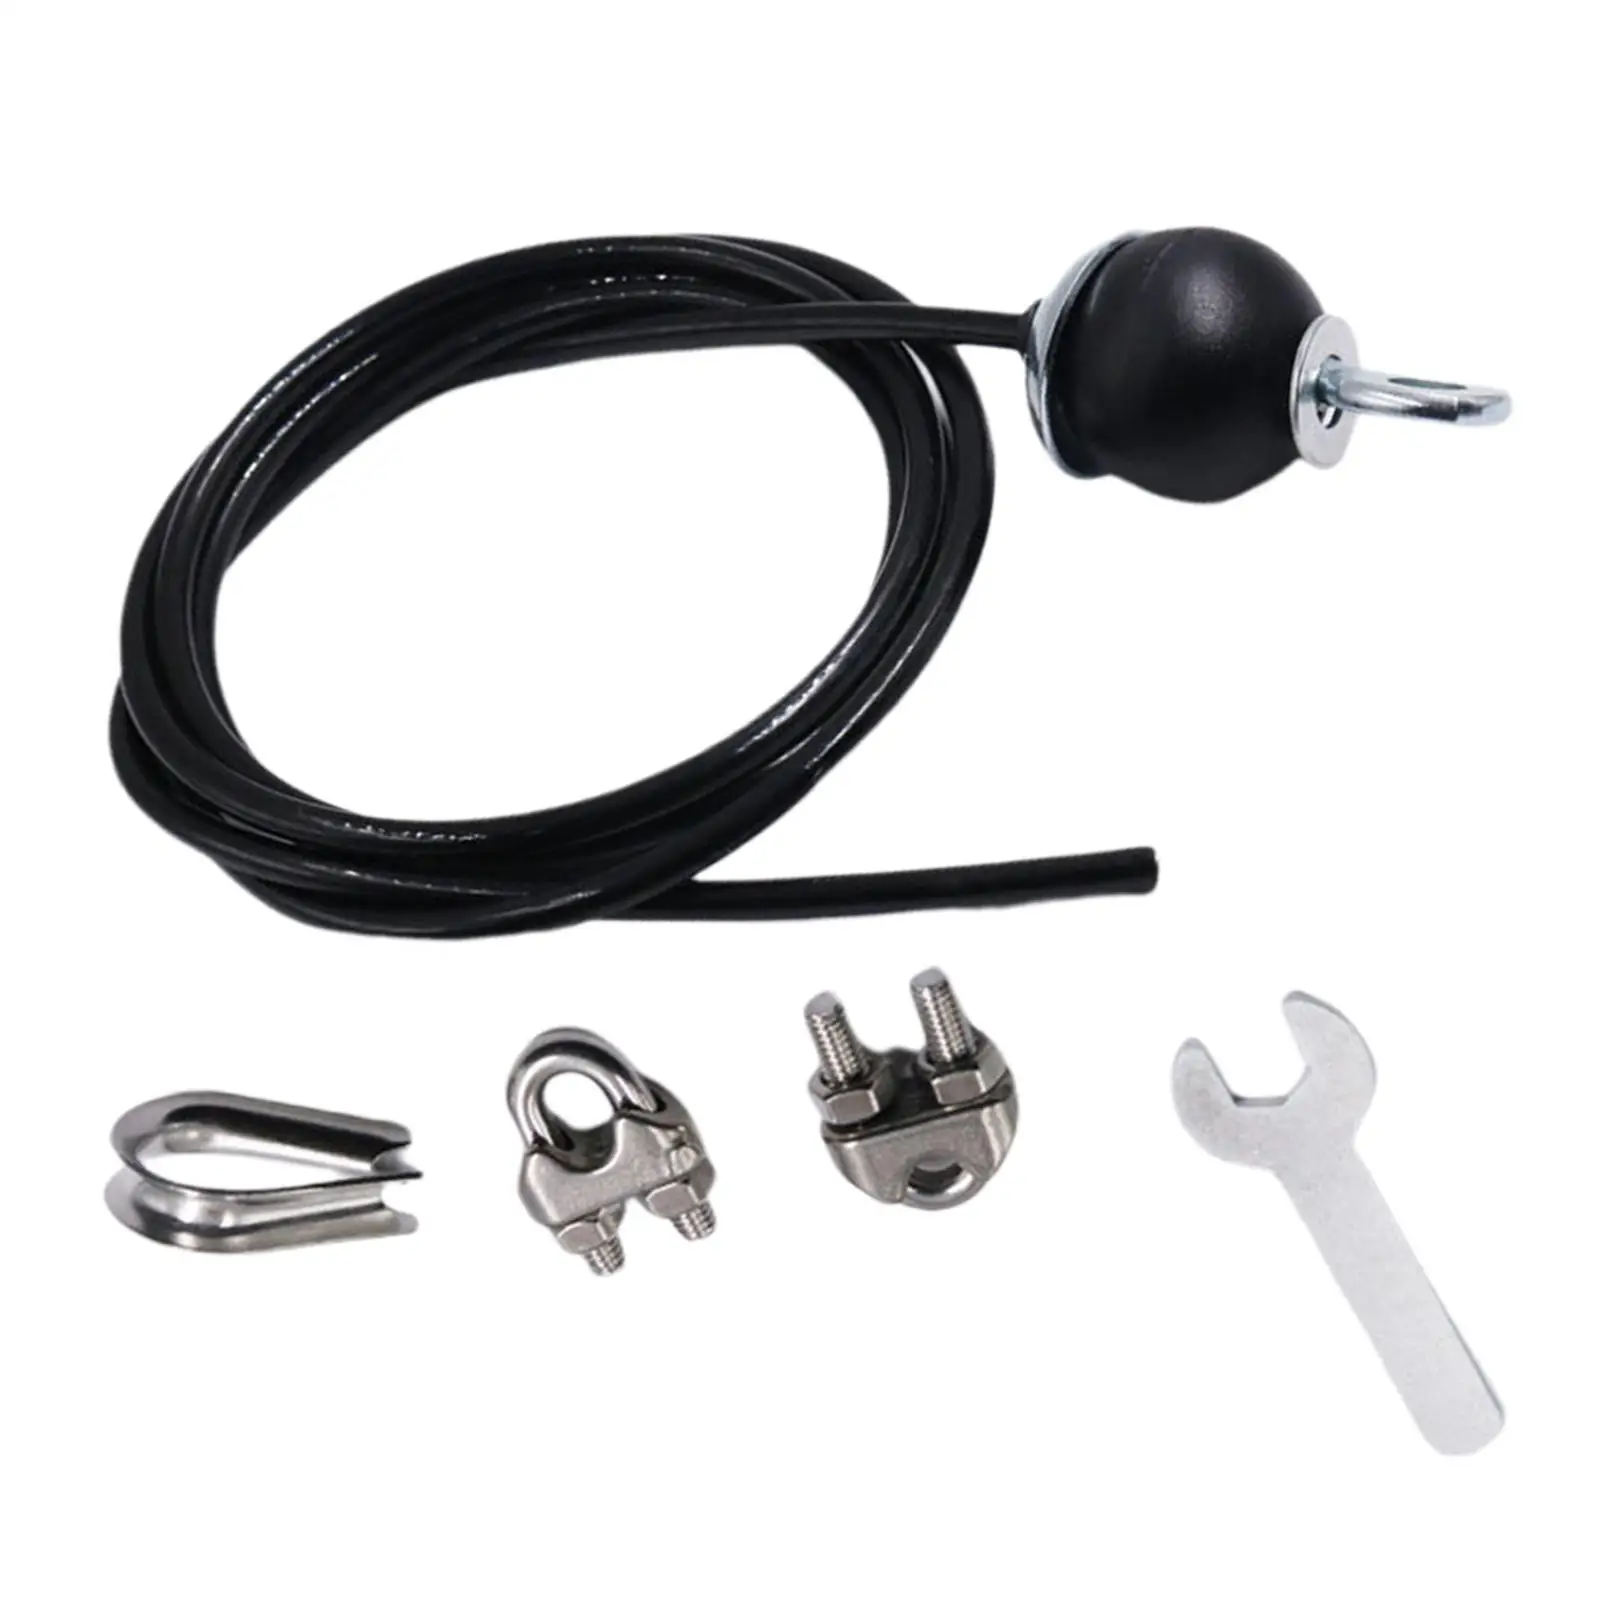 Steel Wire Rope Kit with Rubber Stopper Ball for Pulley System Exercise Accs